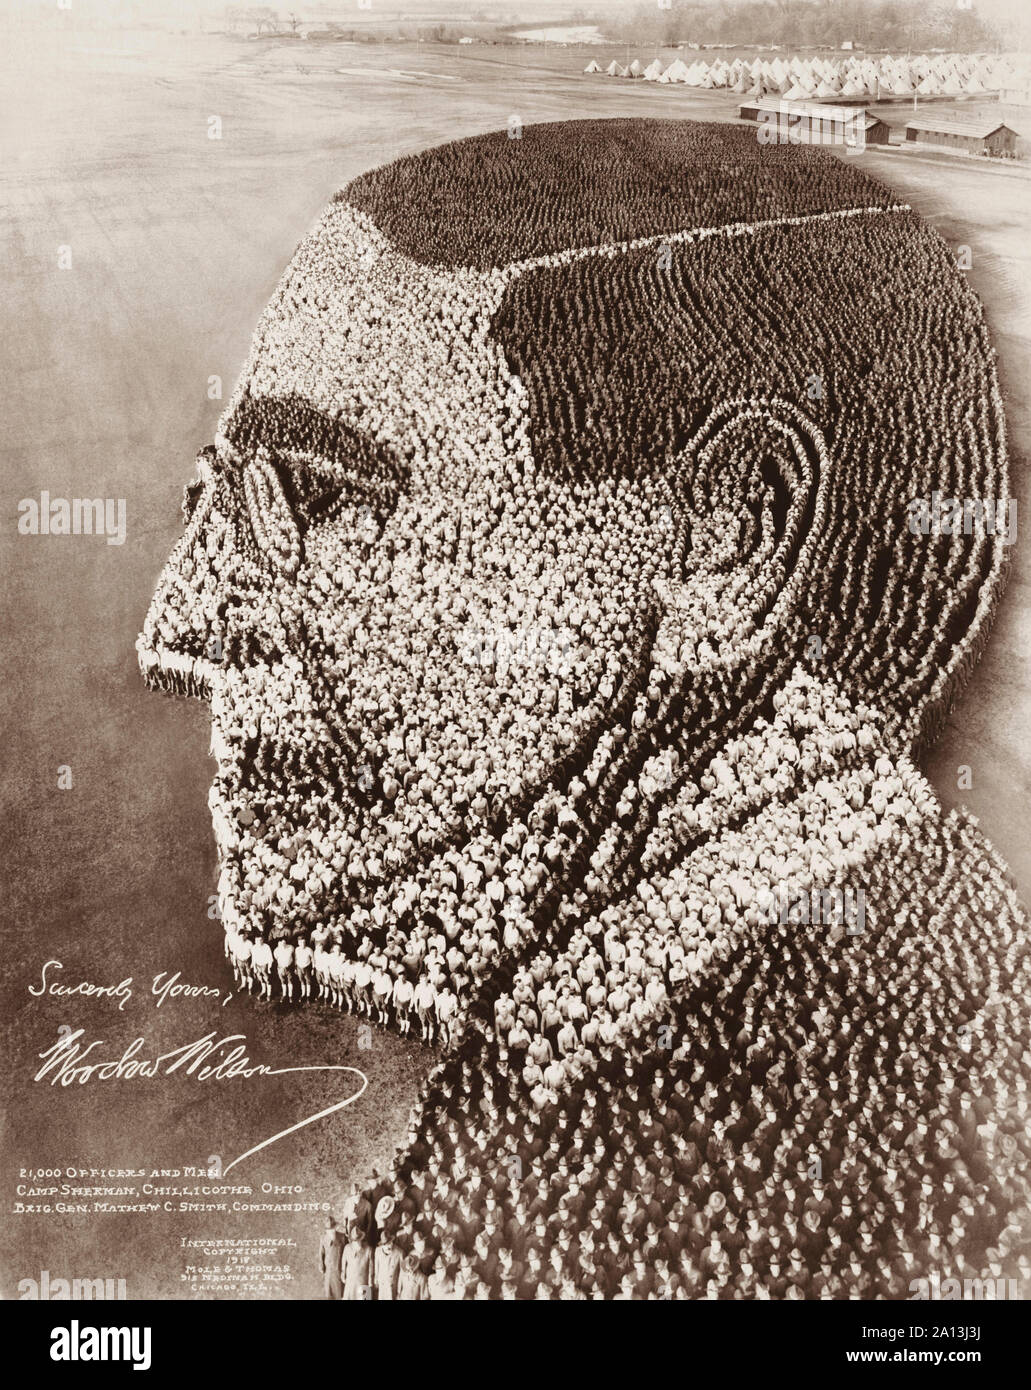 A human-formation depicting a bust profile of U.S. President Woodrow Wilson. Stock Photo